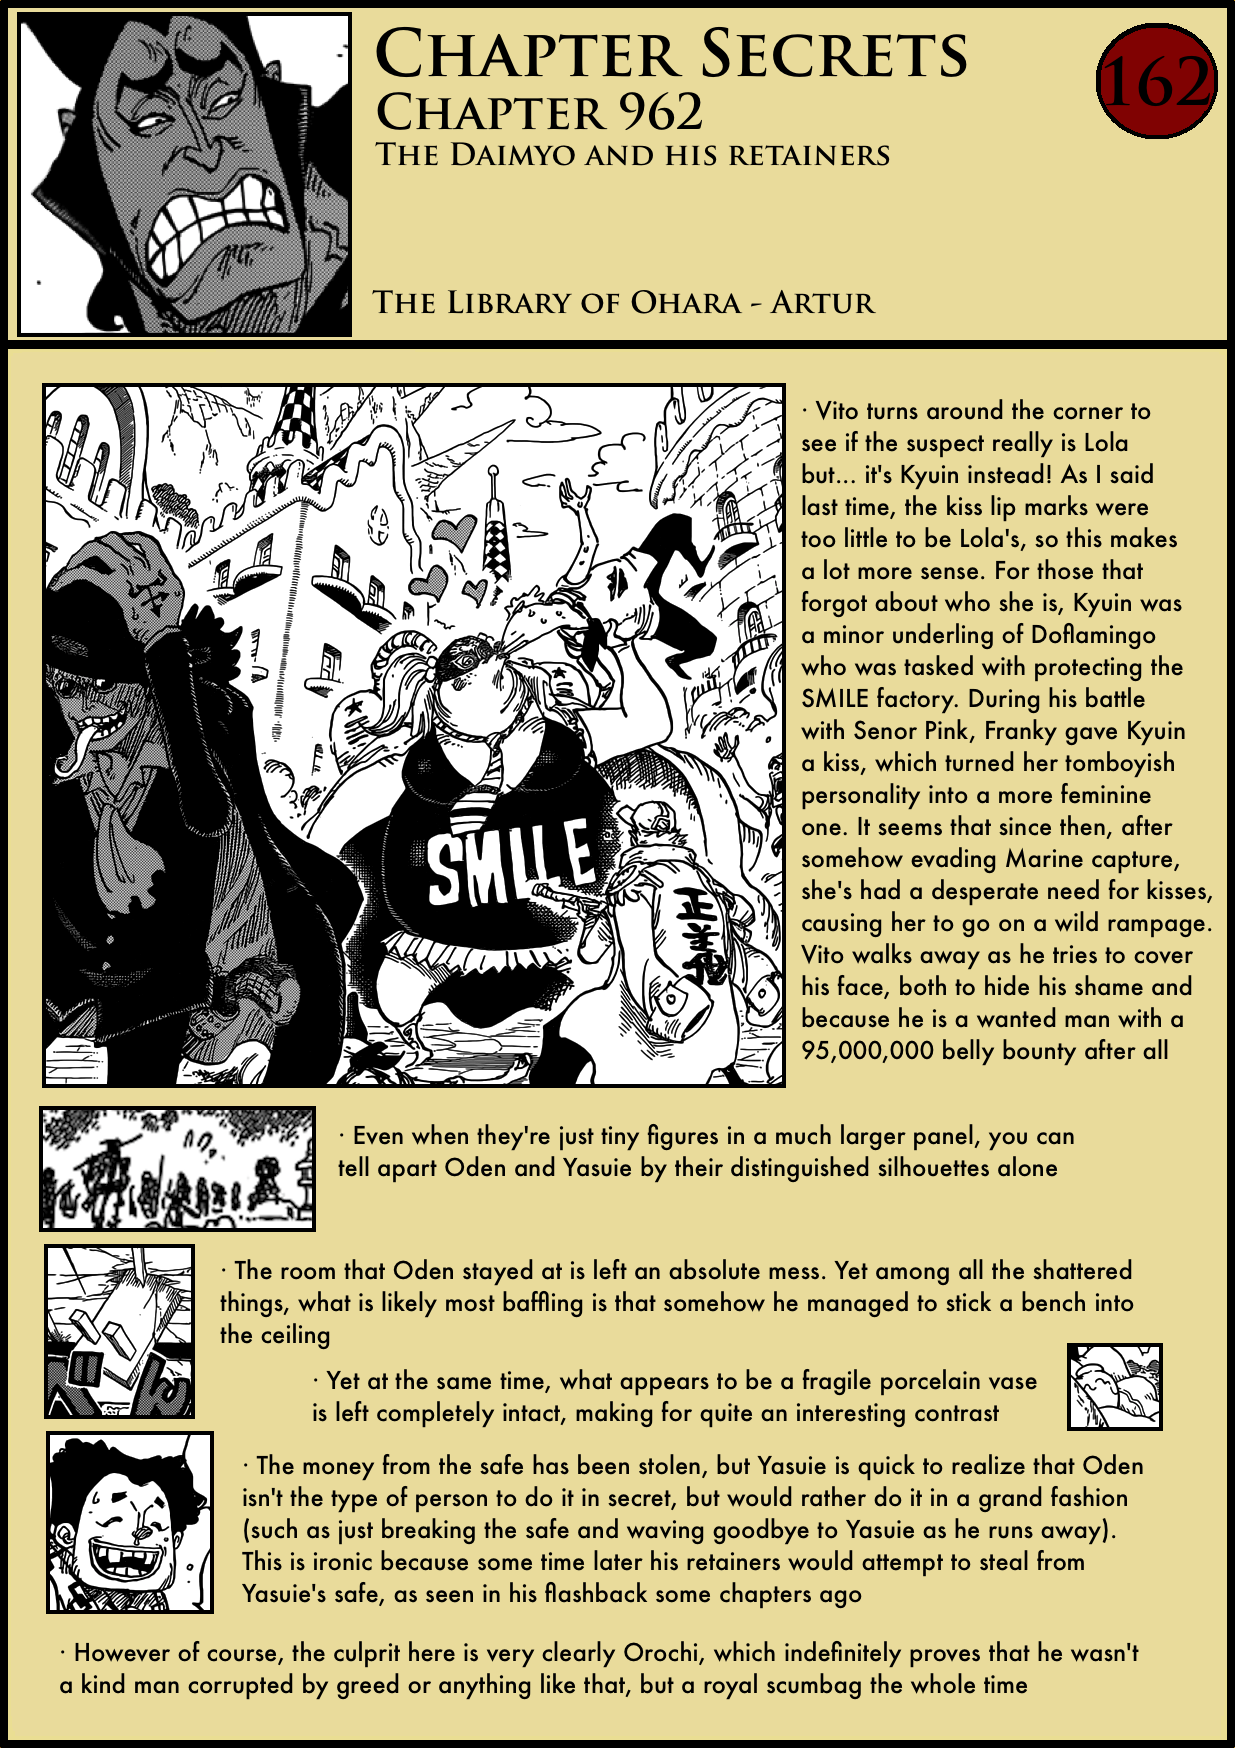 Chapter Secrets Chapter 962 In Depth Analysis The Library Of Ohara